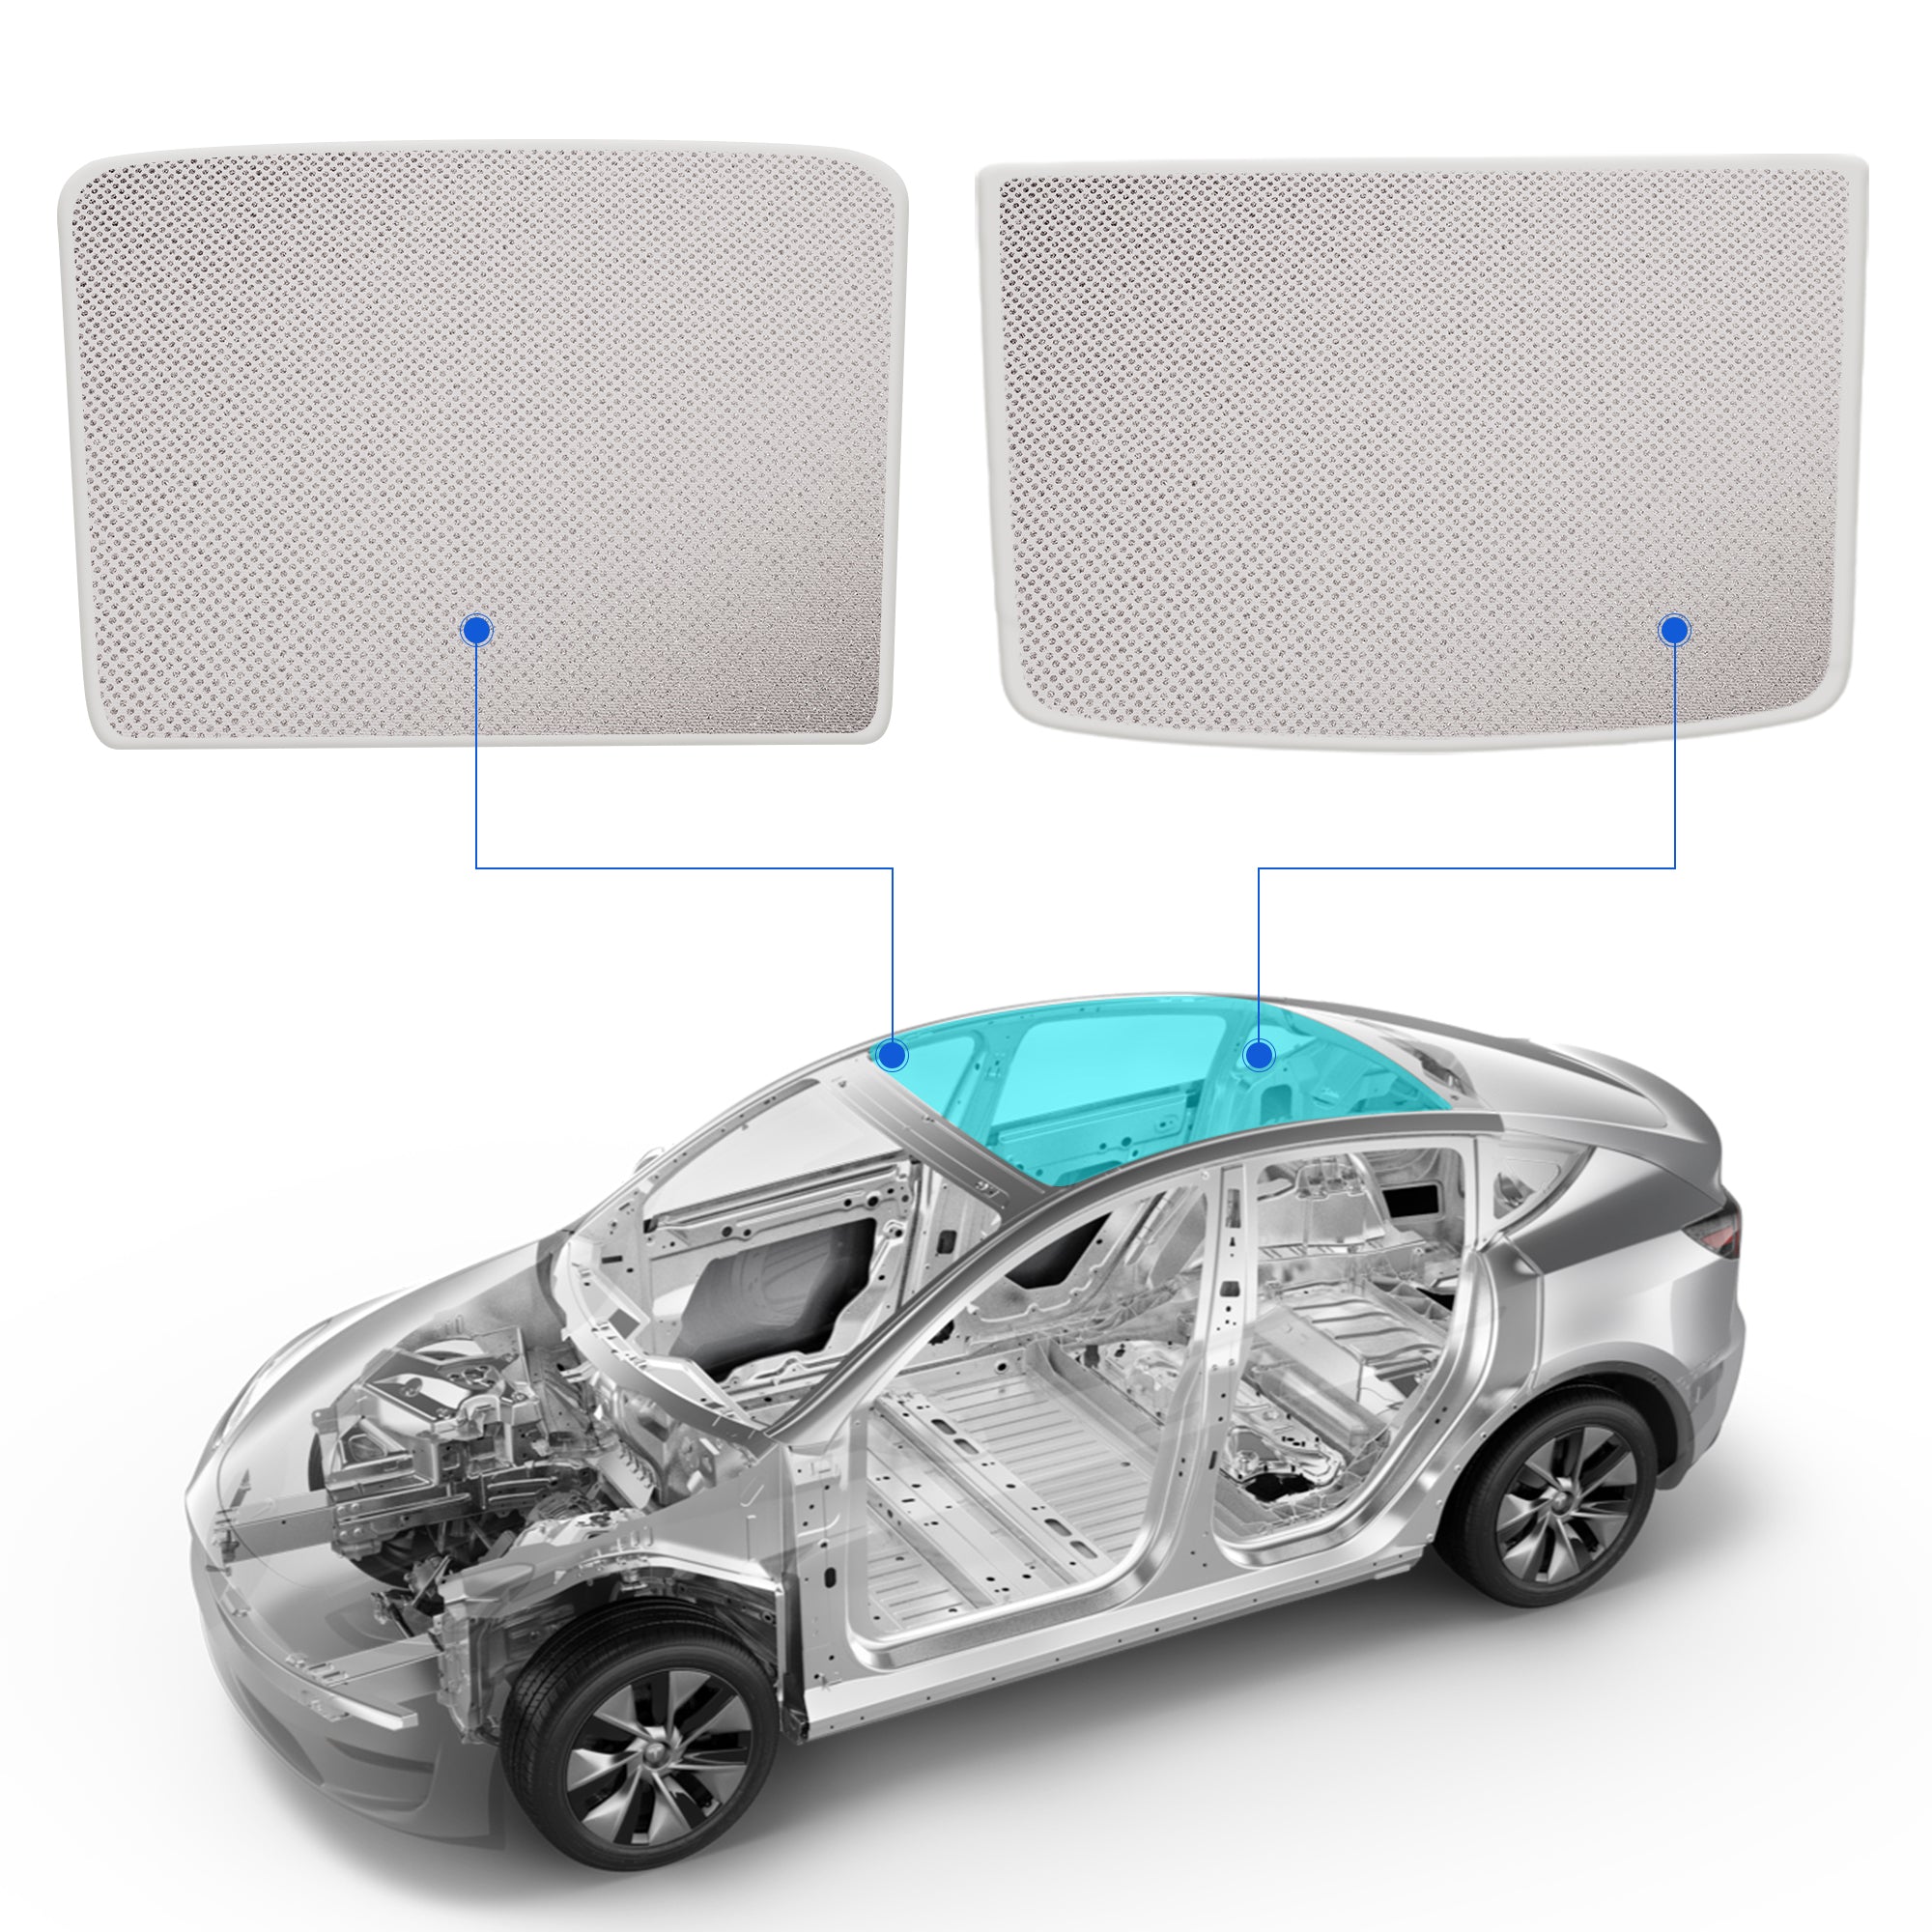 Nestour Tesla Model Y Sunshade, ice Crystal and Nano Coated Foldable Sunroof Window Shade Accessories Fit for Tesla Model Y2016-2023, with UV/Heat Insulation Film (White Set of 2)